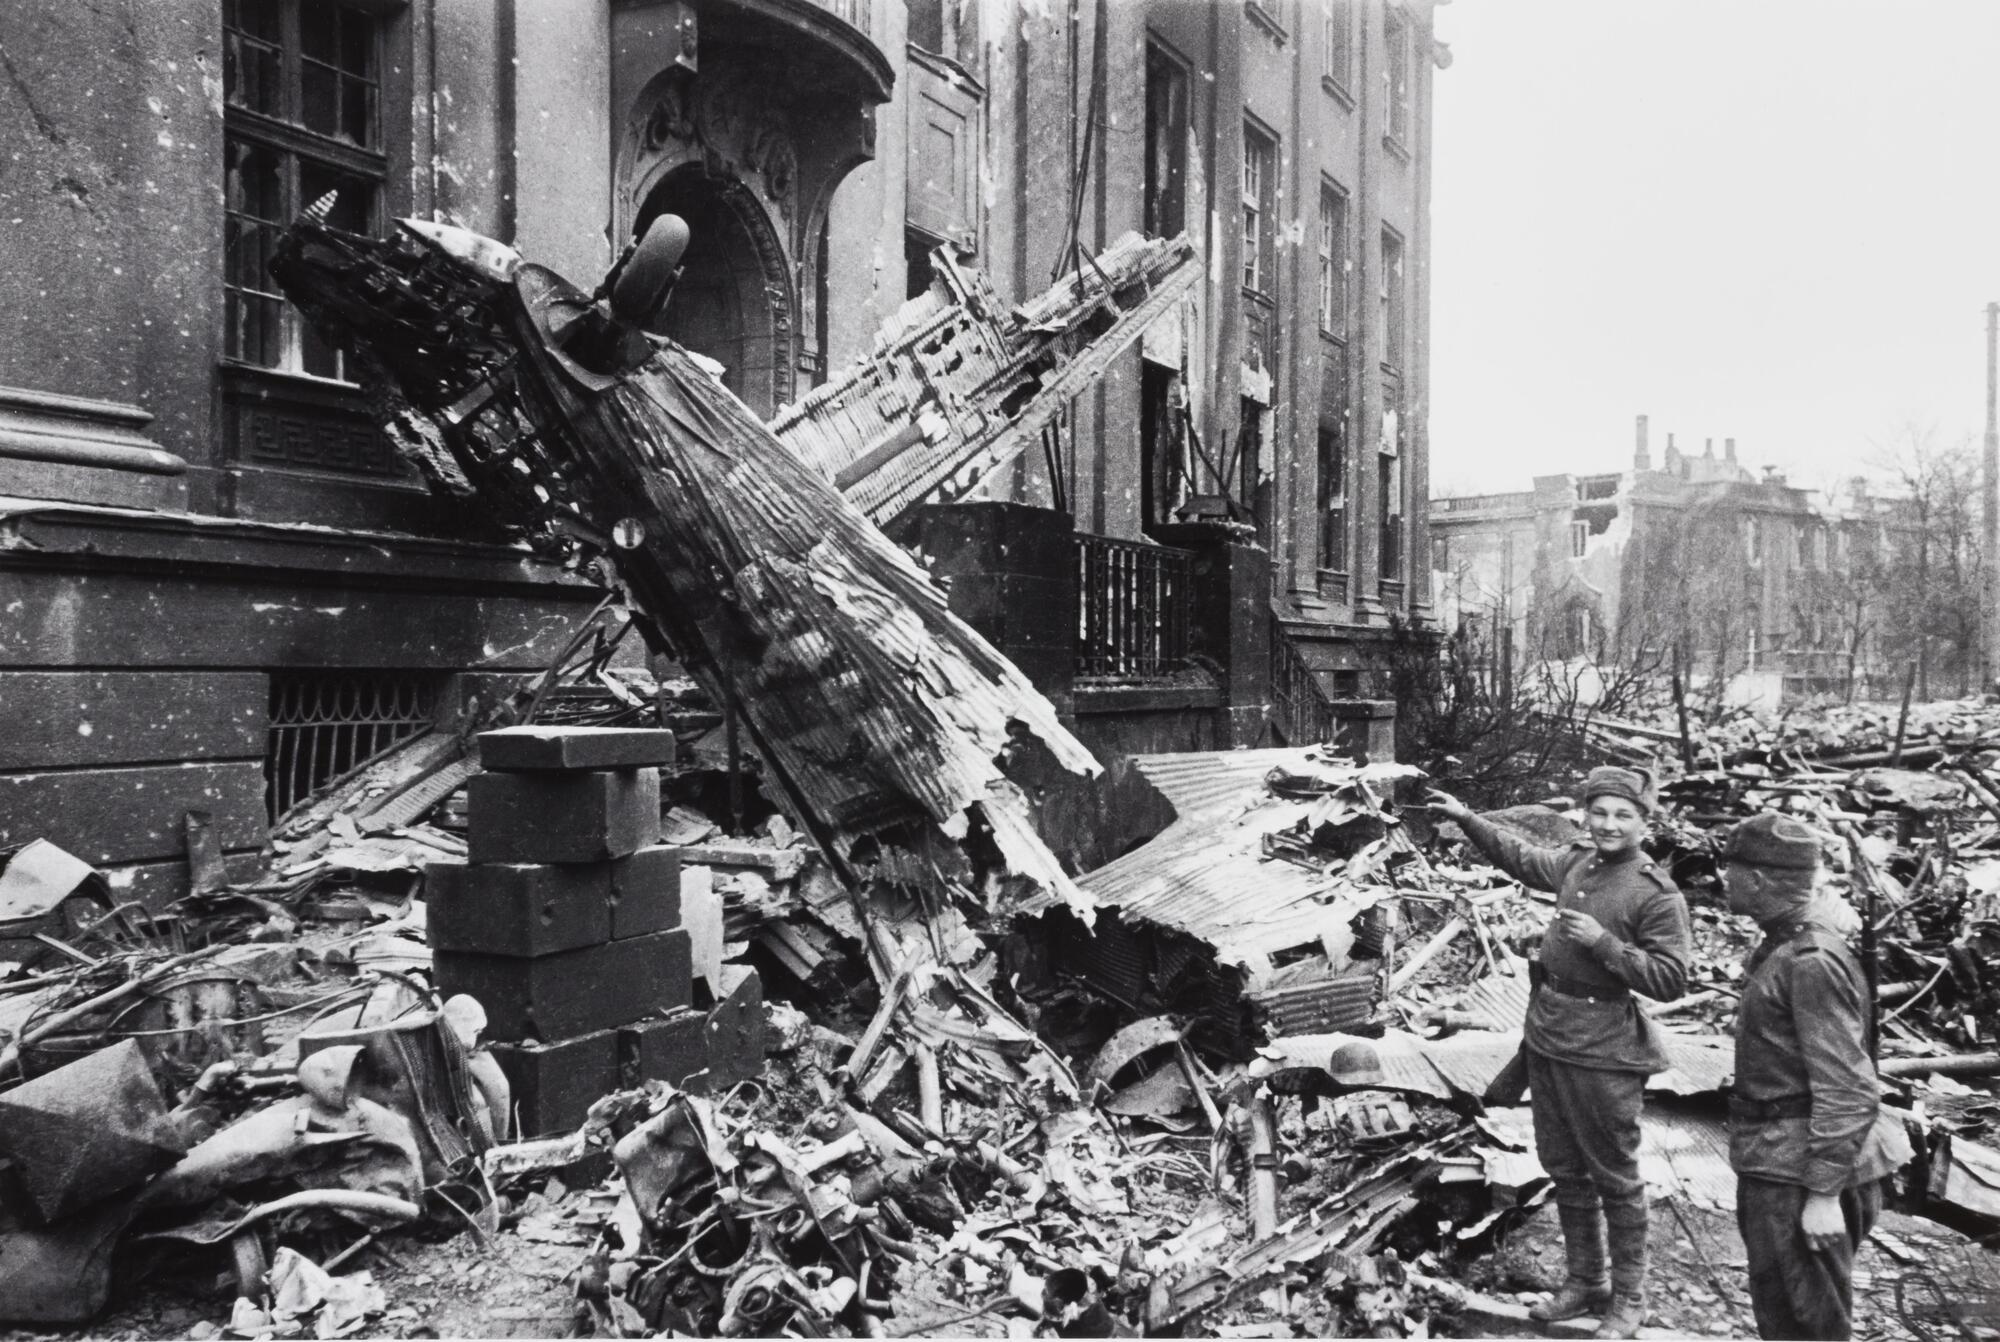 Street scene with two soldiers who look at the remains of a destroyed plane that leans against a bombed-out building fa&ccedil;ade.